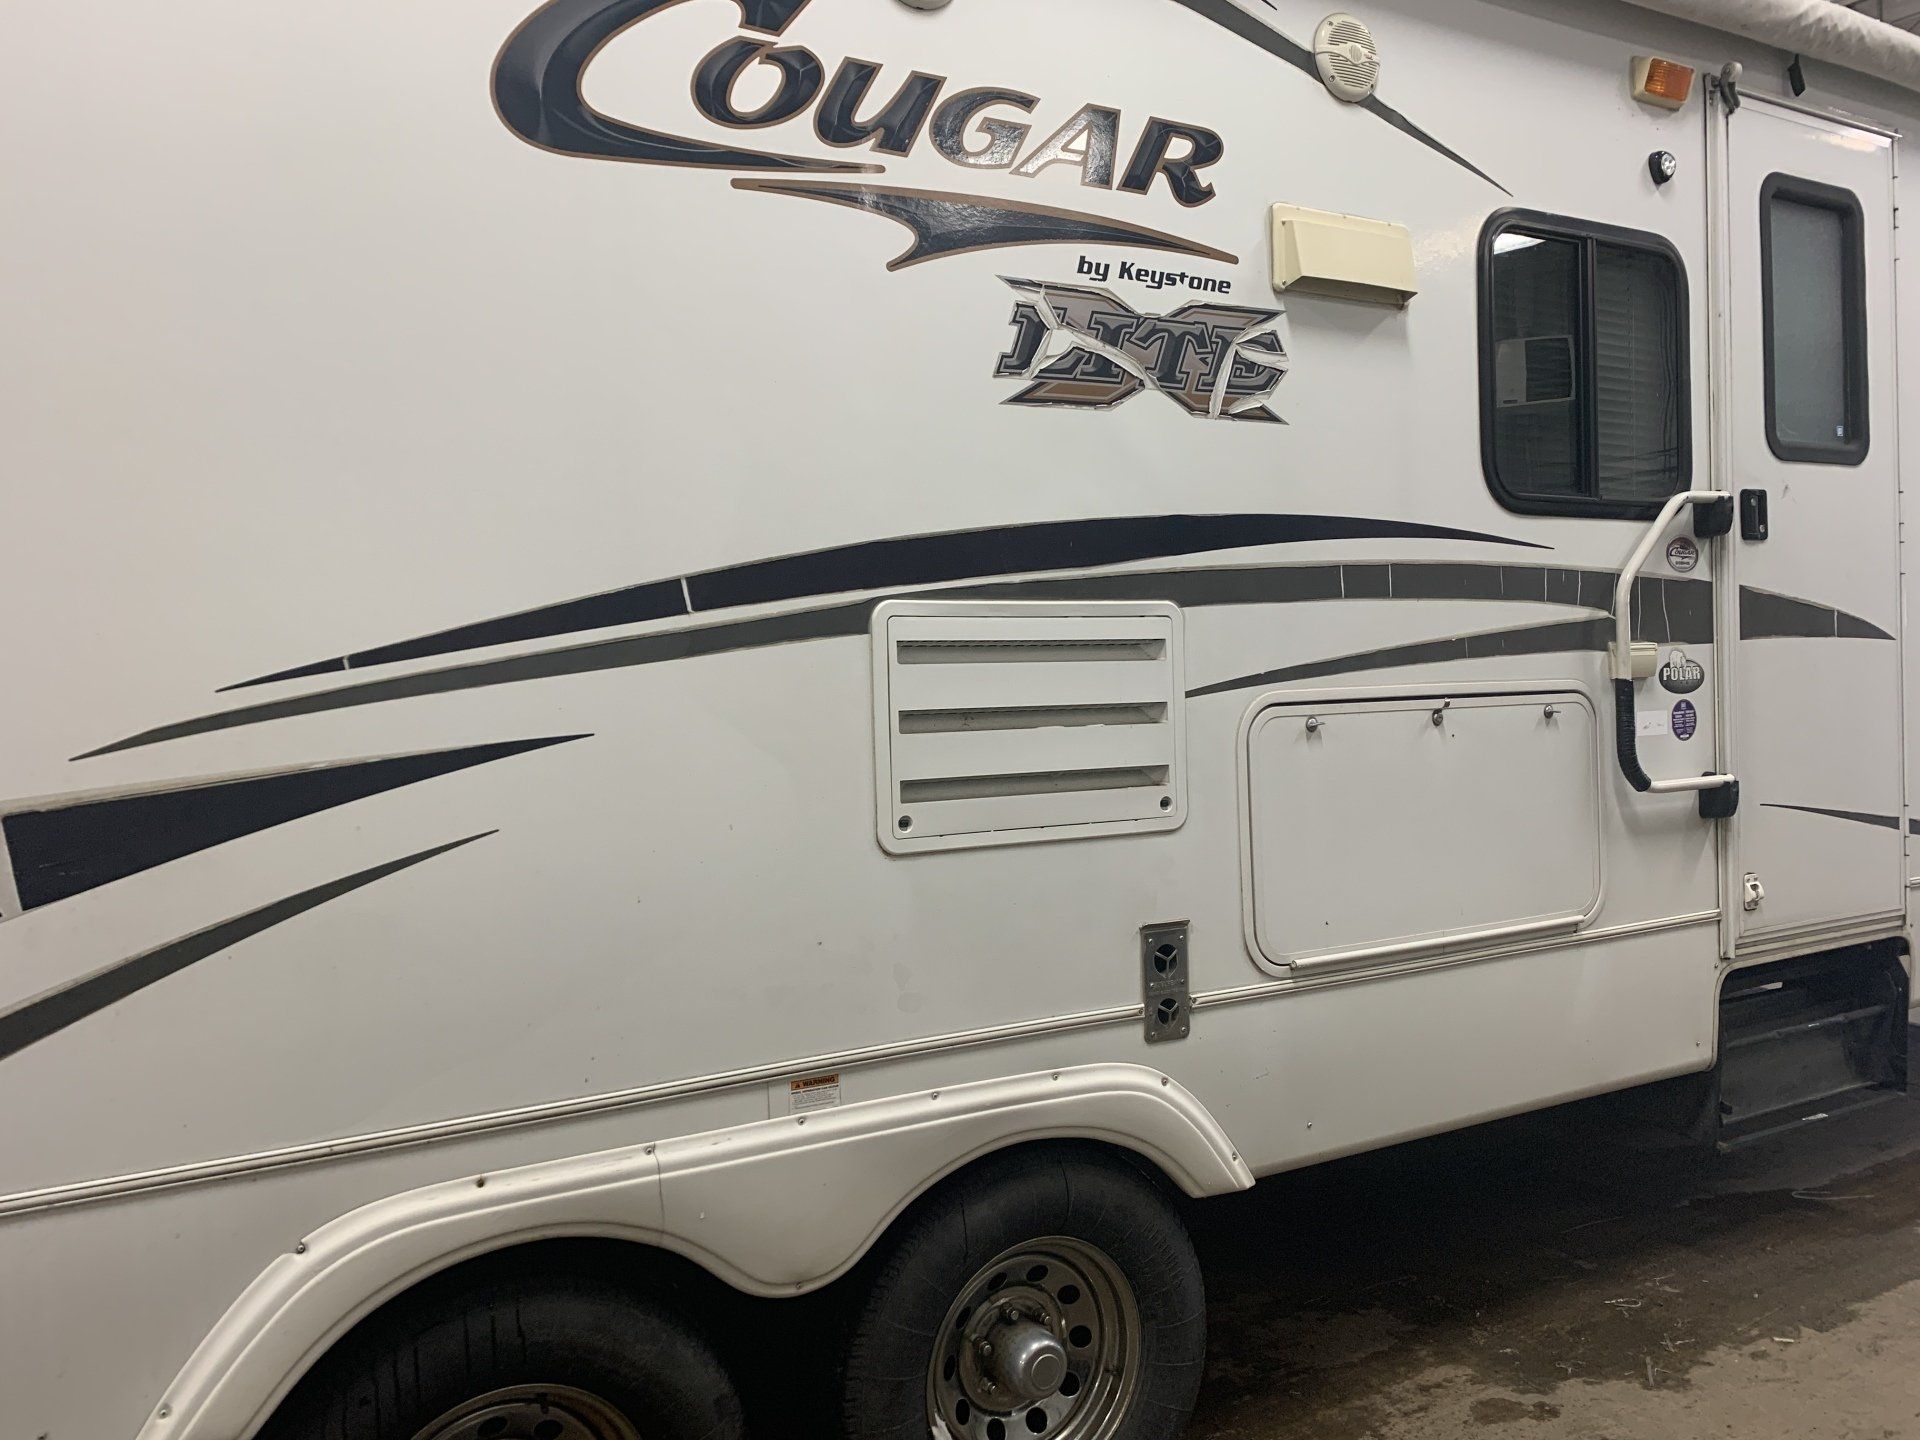 2020 - Alberta's Worst RV Decal Contest - Grand Prize Winner - Before & After - Pic 13